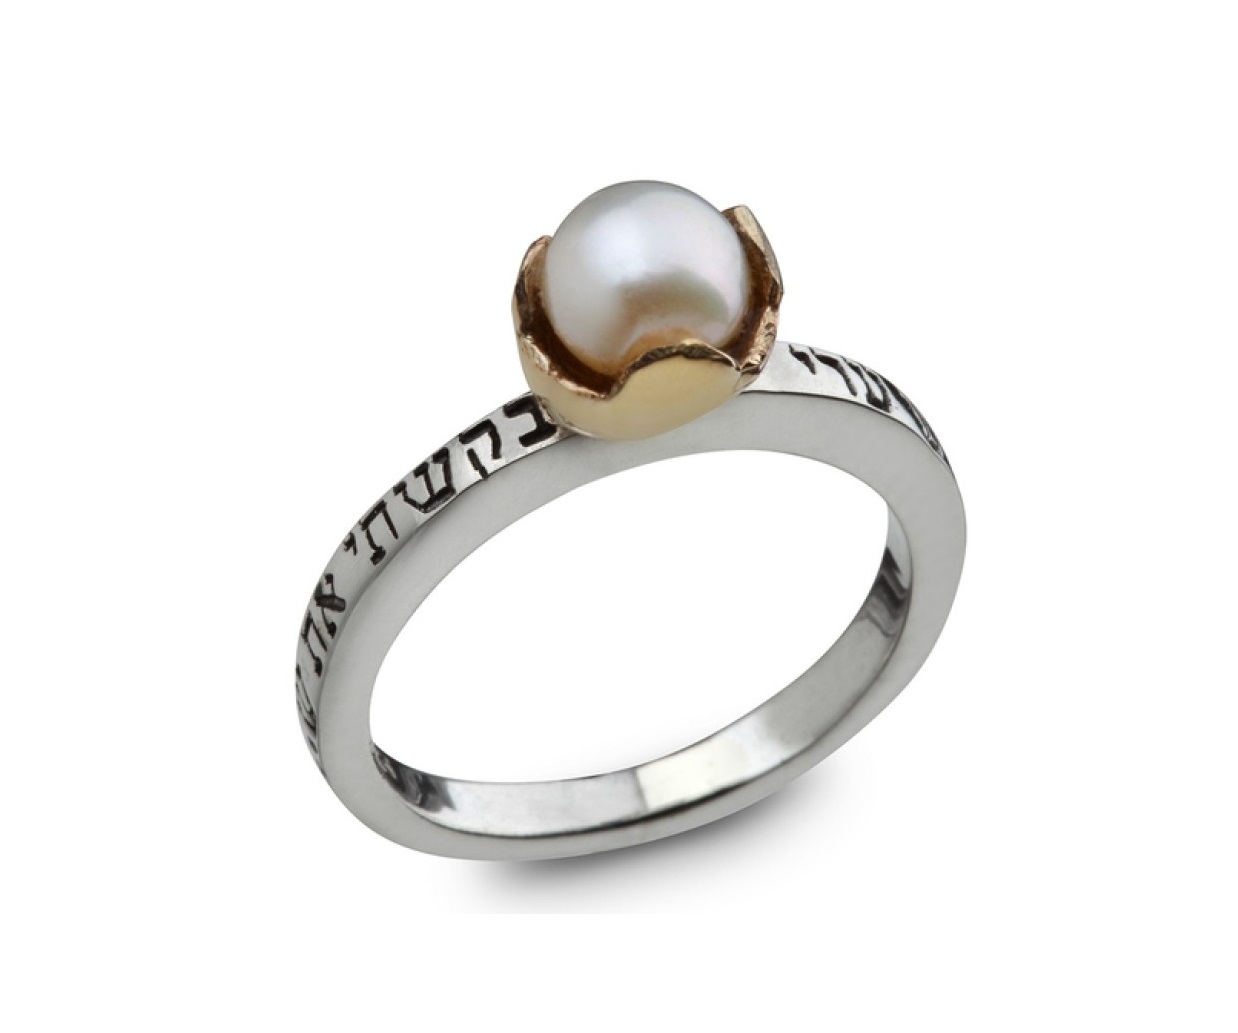 Silver and Gold "Pearl Love" Ring for Women